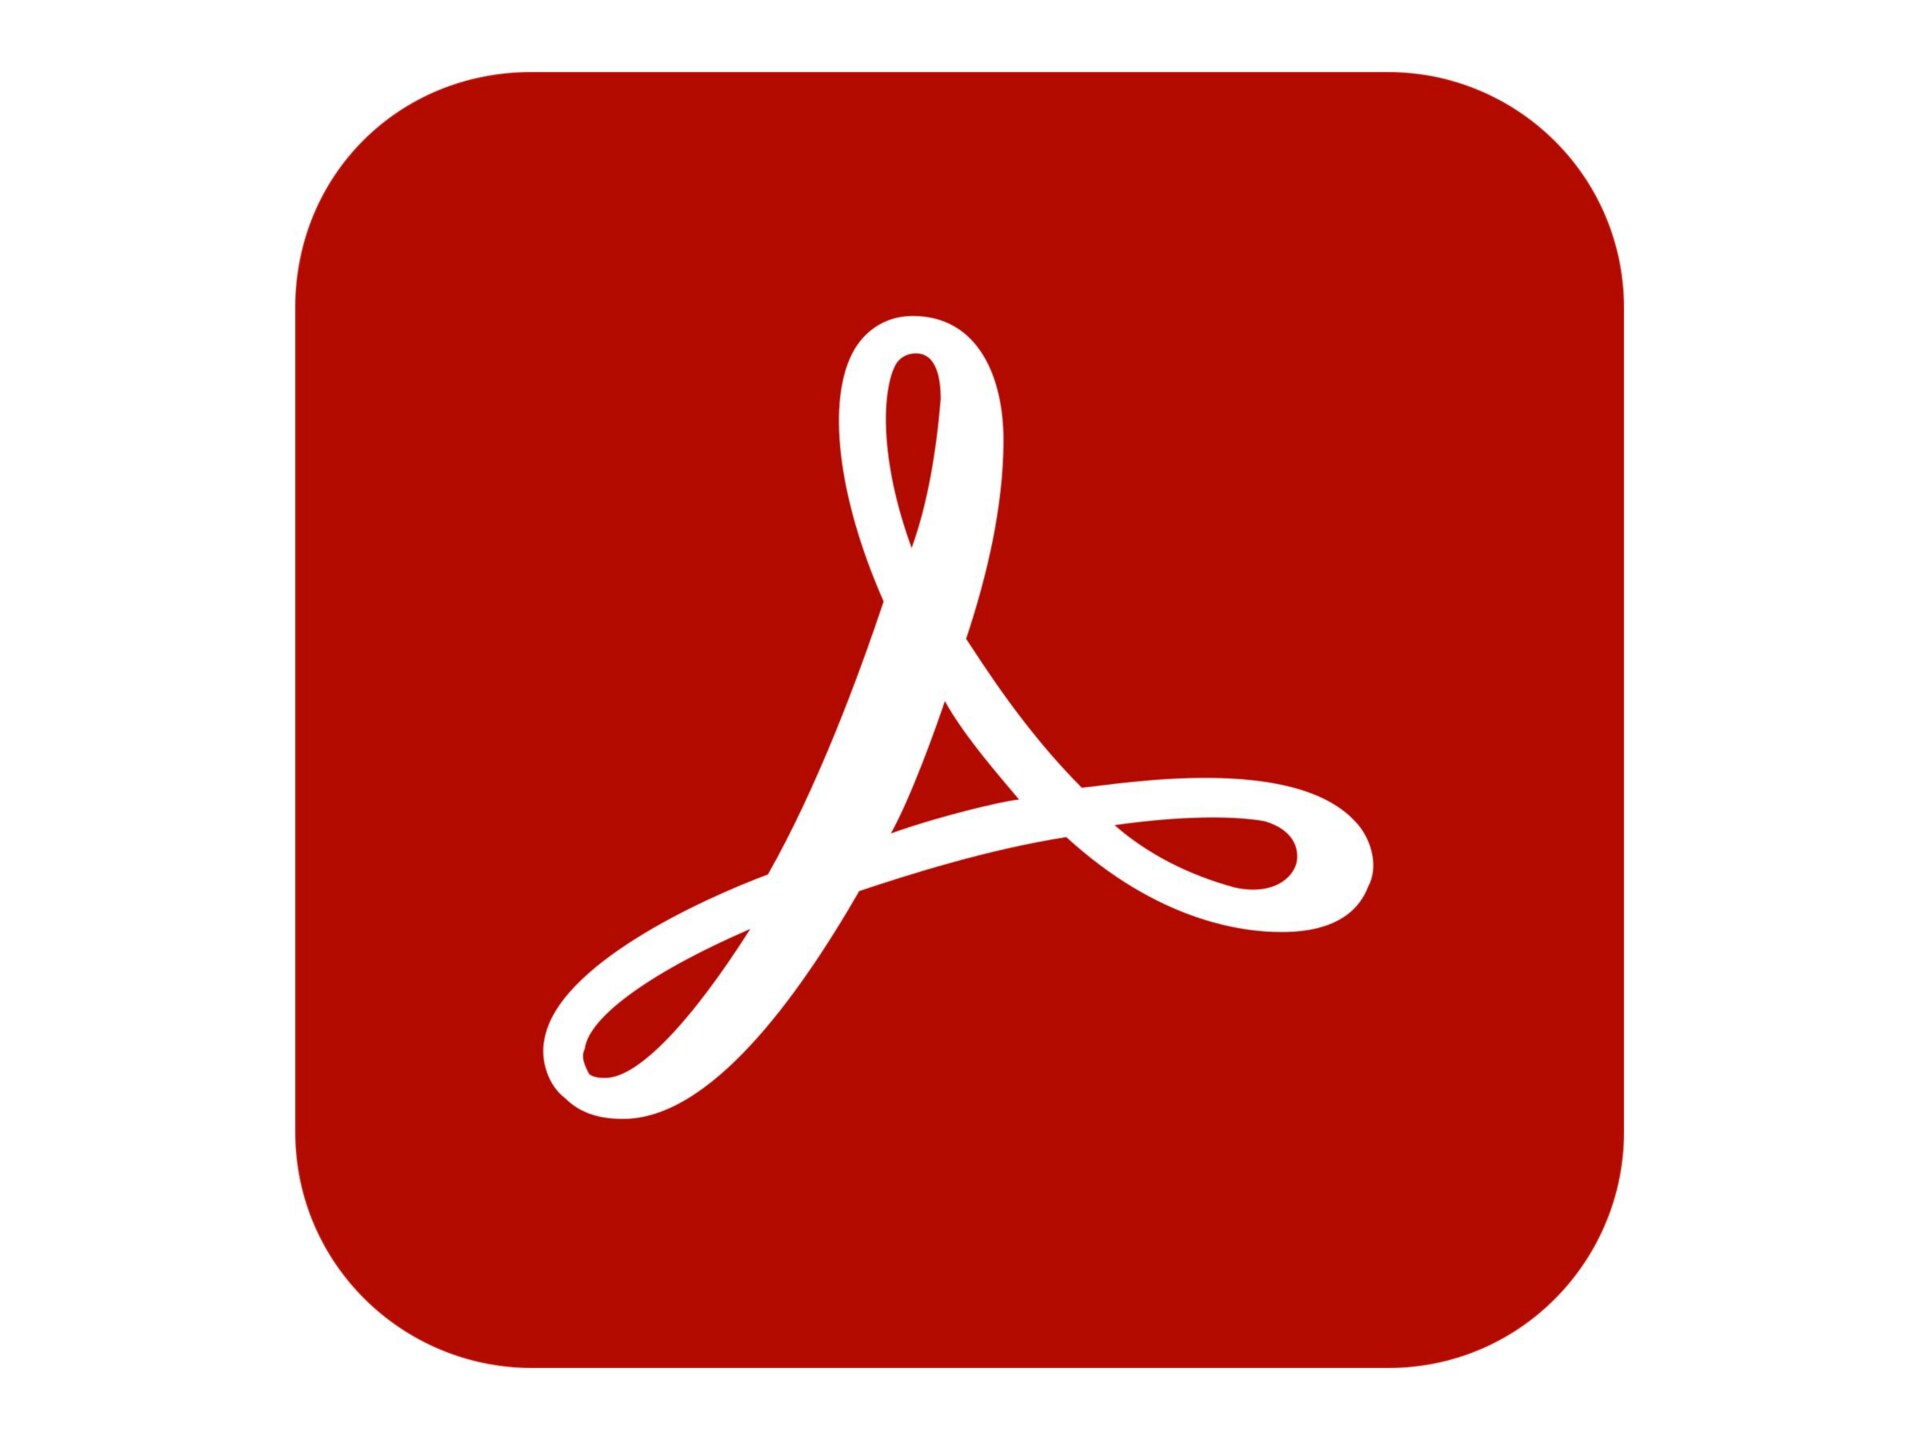 Adobe Acrobat Pro DC for Teams - Subscription New (9 months) - 1 user